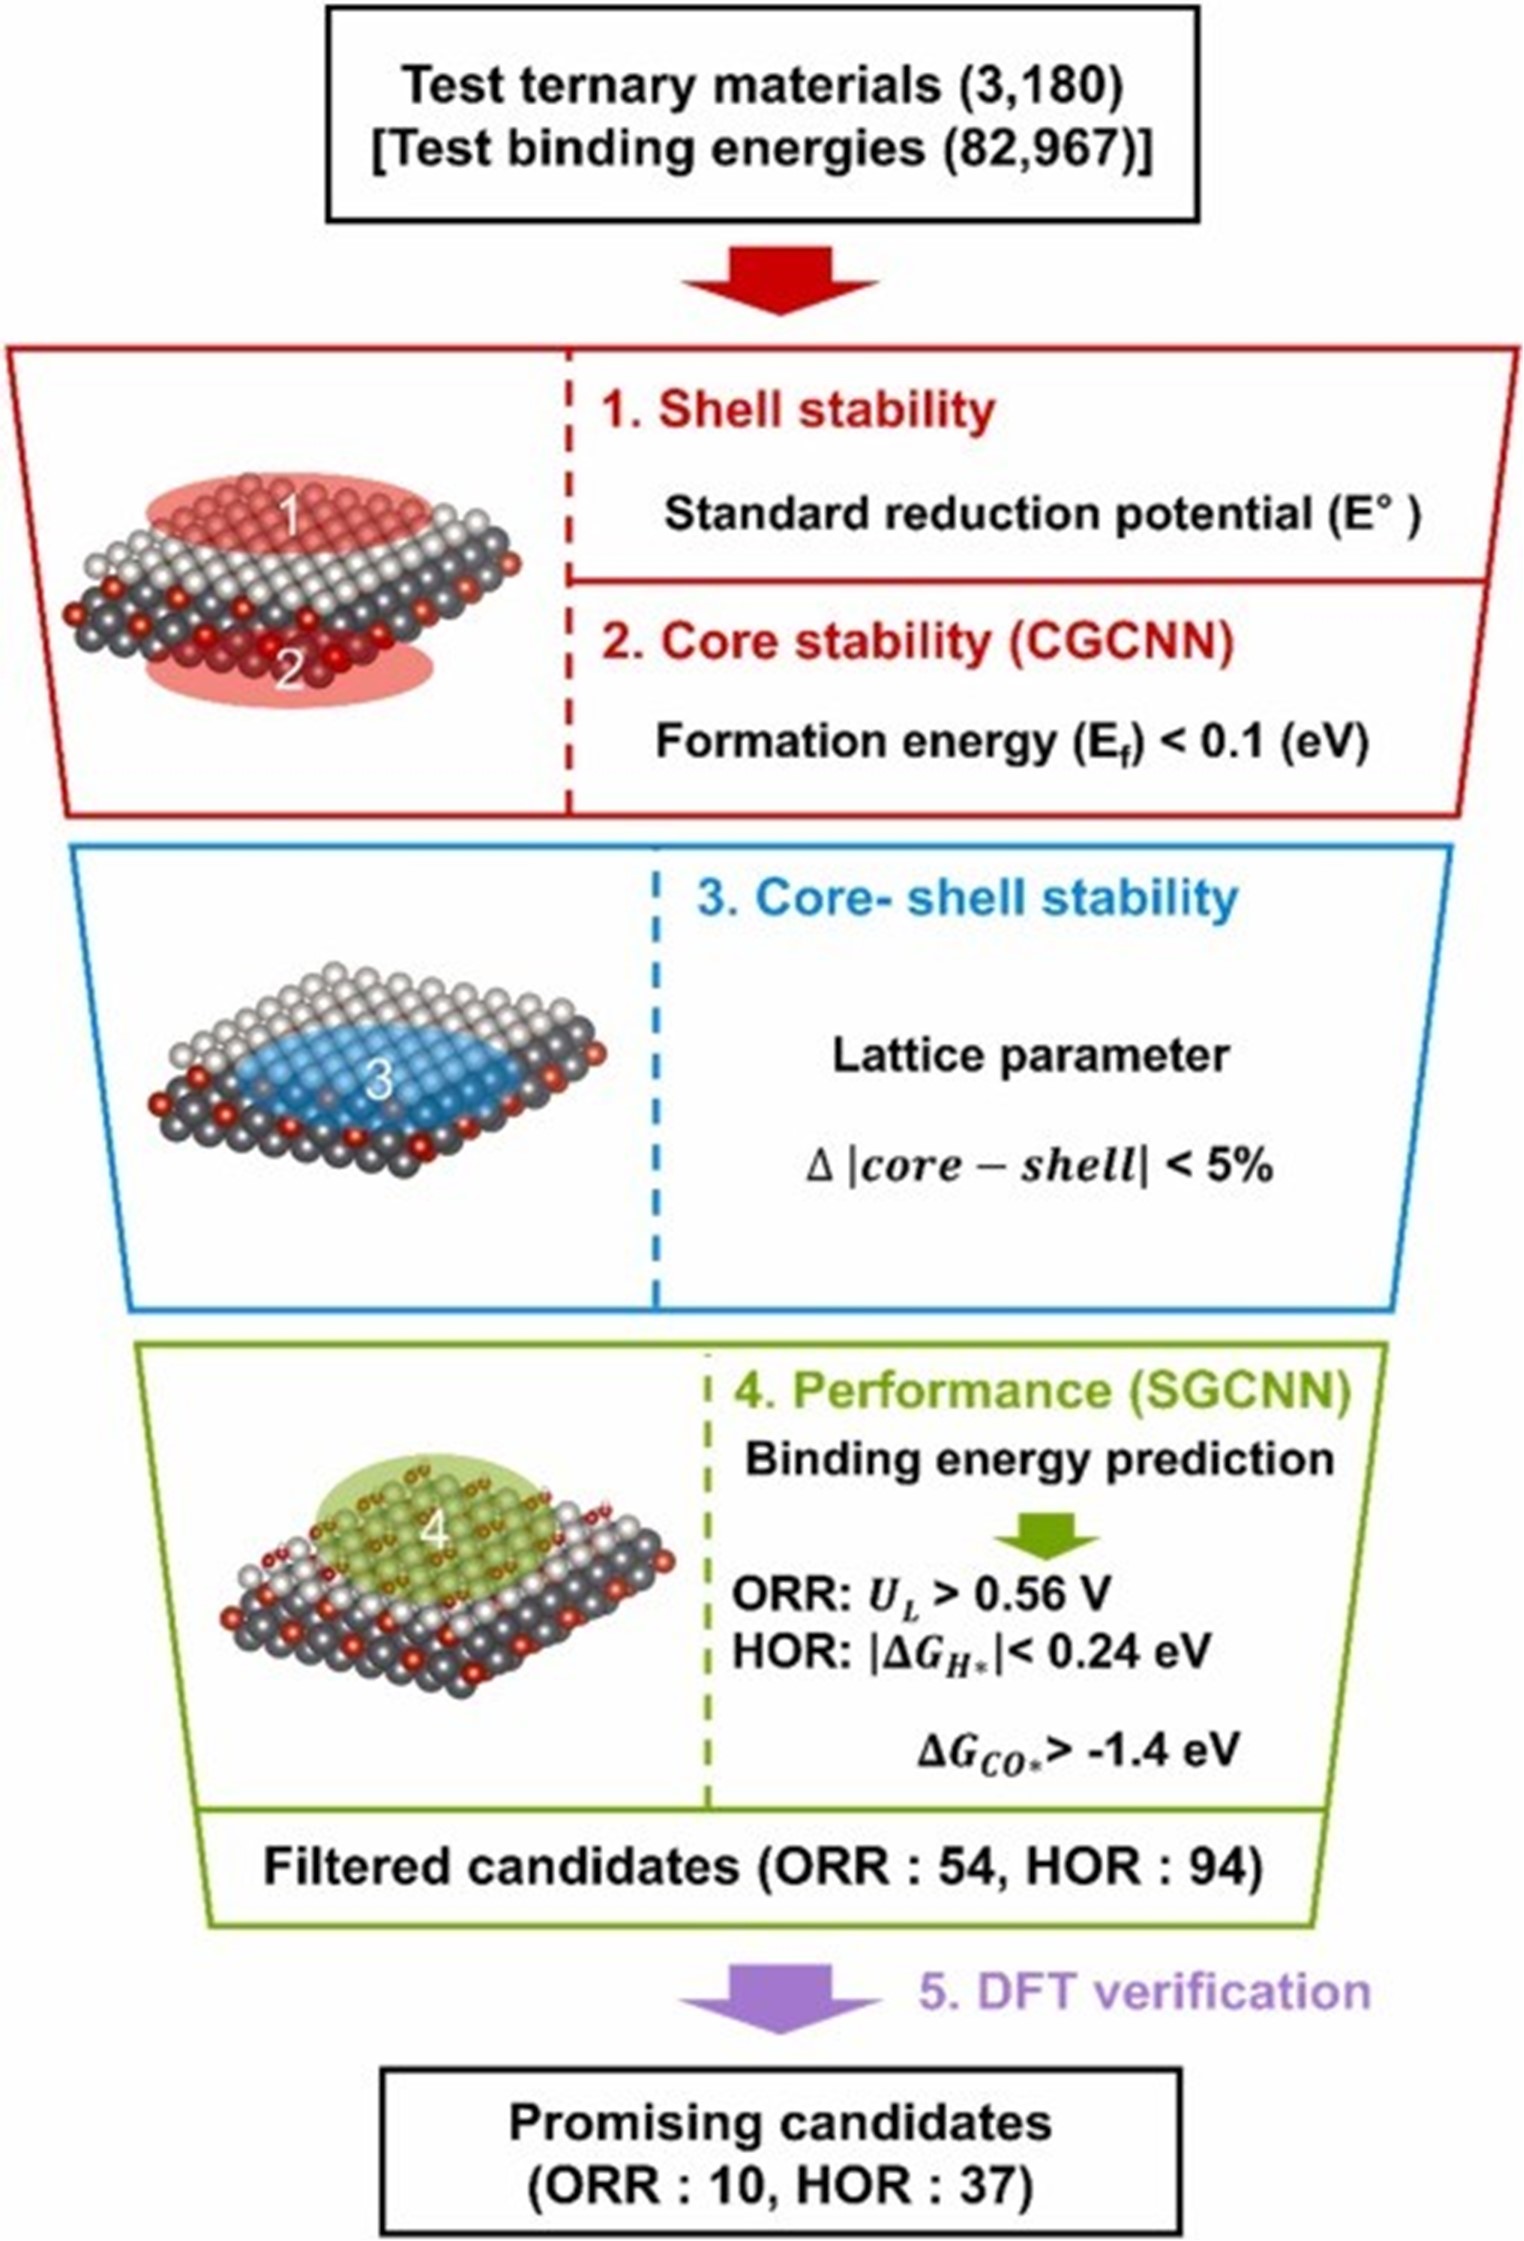 Machine learning-driven material screening workflow for each anode and cathode of fuel cells. (Image: KIST)